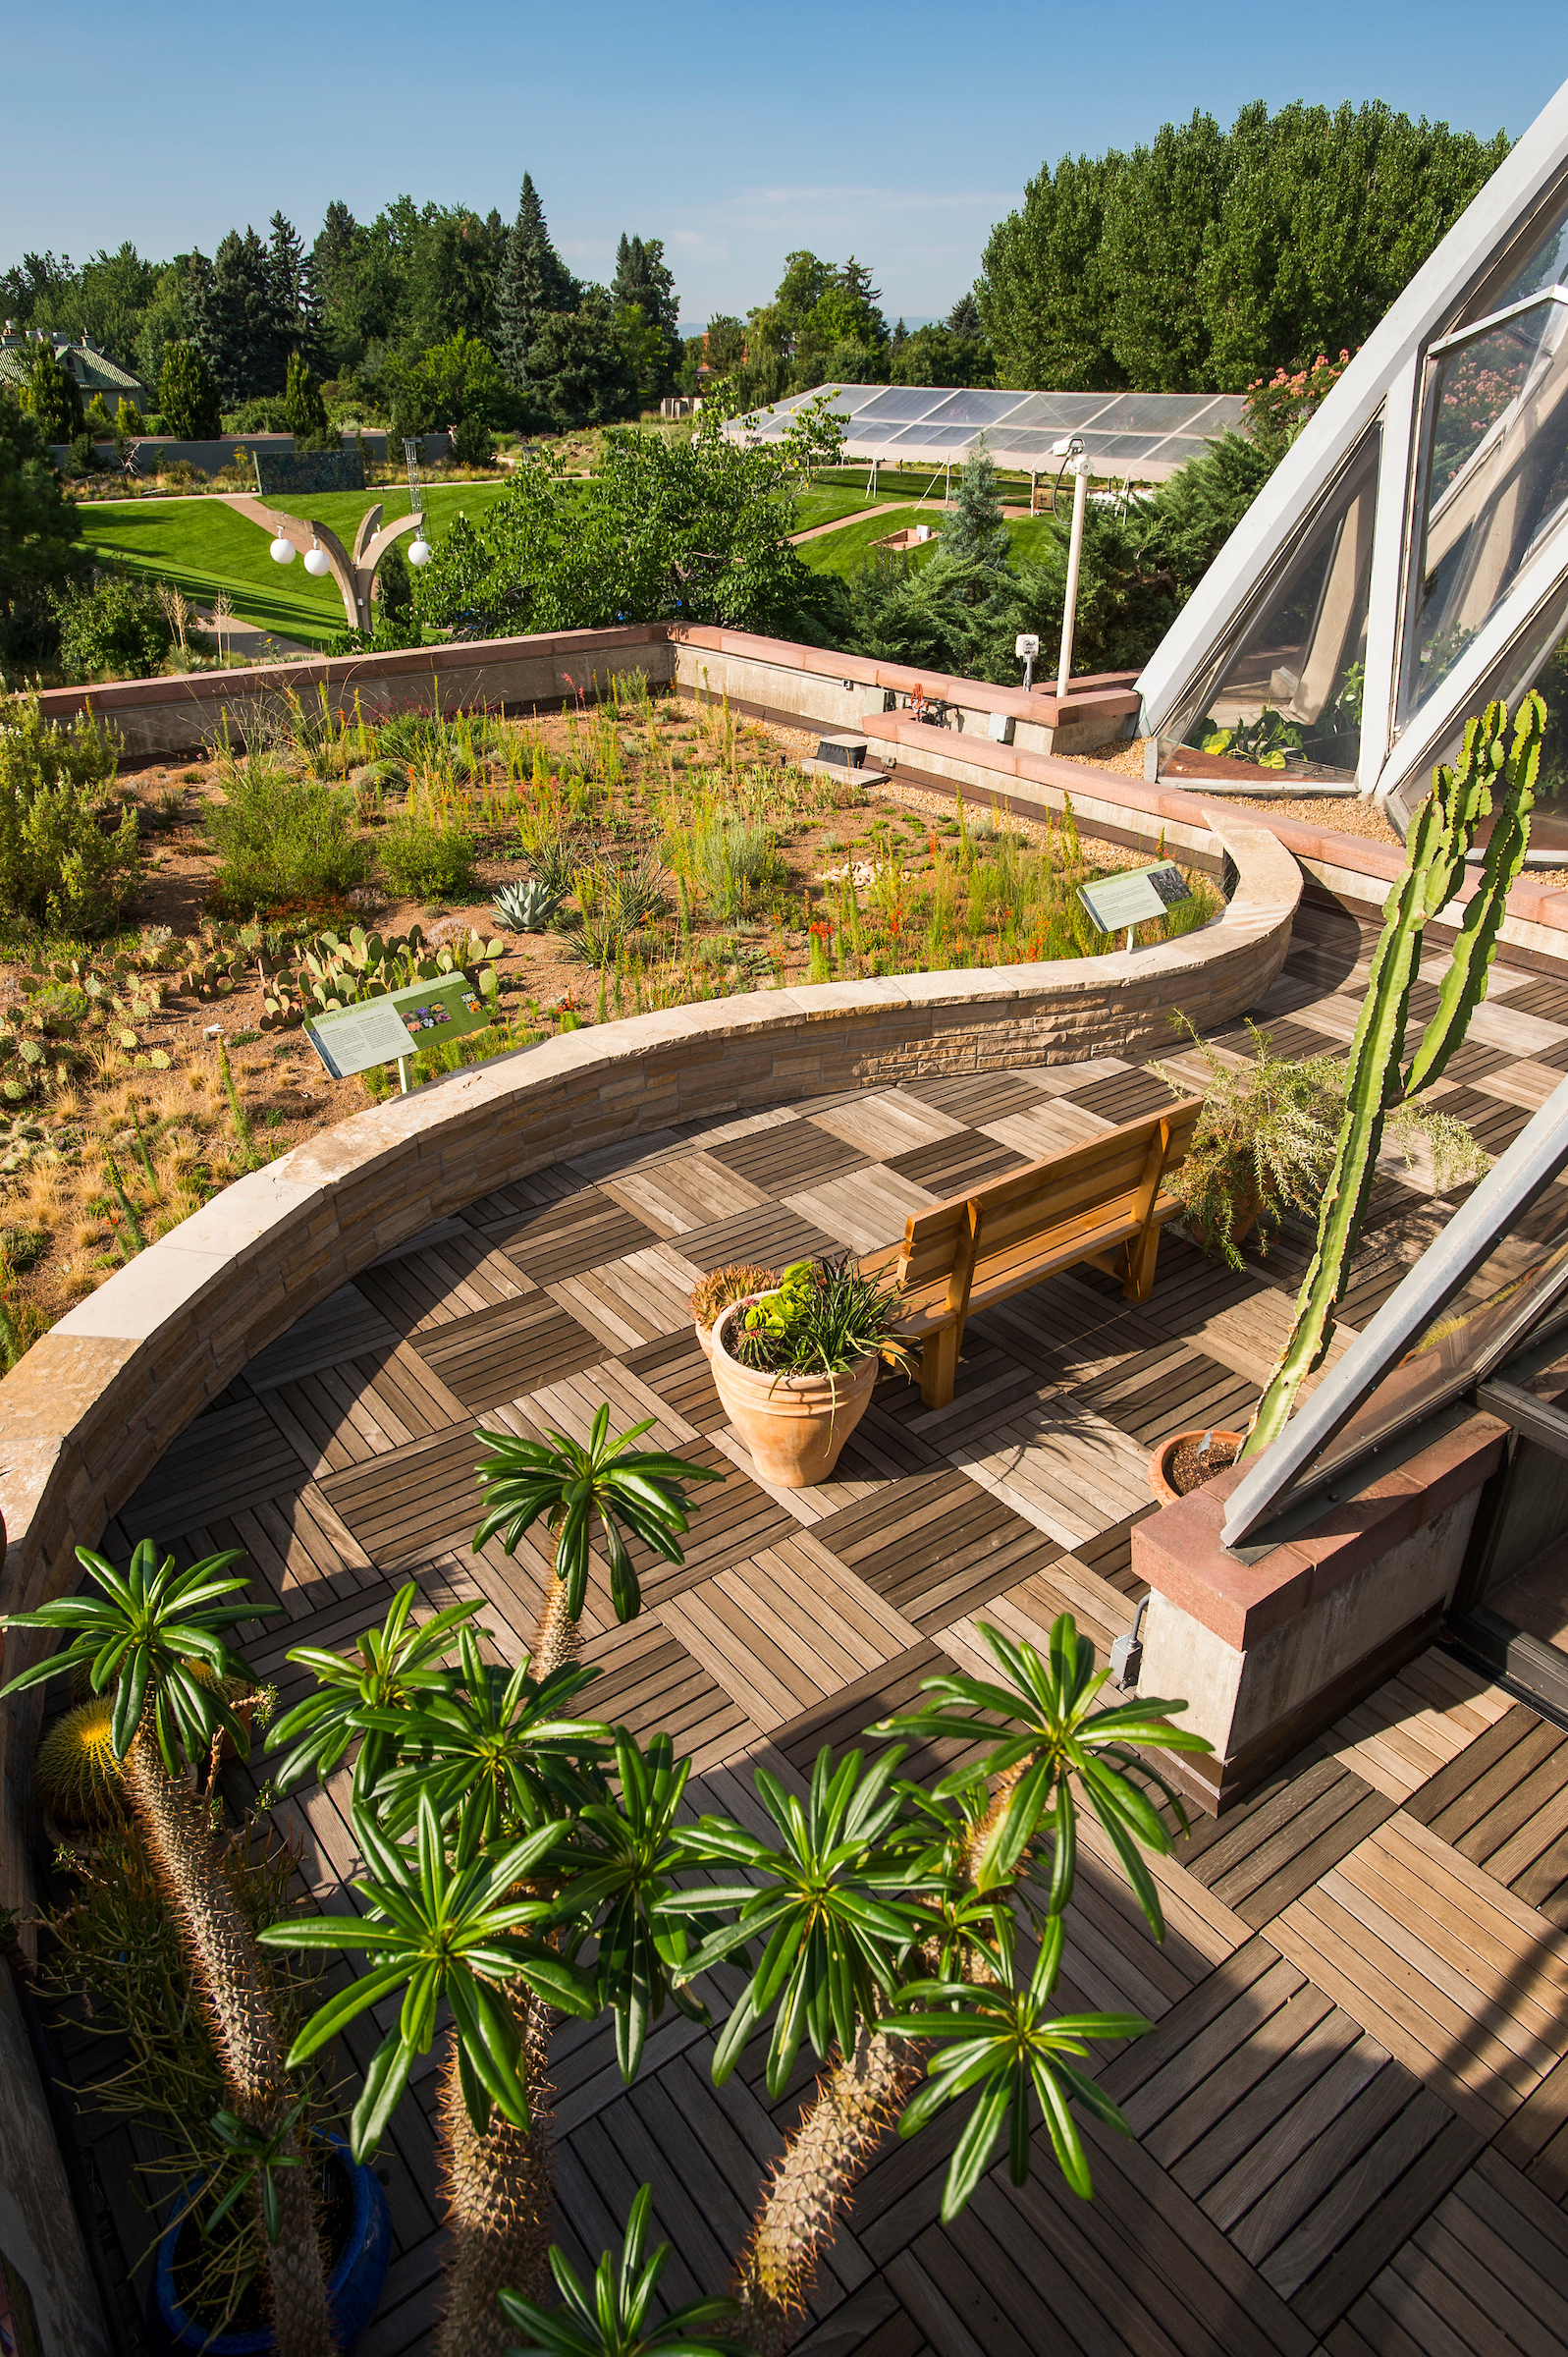 A winding wall bisects the image of a garden on the roof of a building at the Denver Botanic Gardens. The foreground is a patio with planters, grasses and cactus in the background, and lawn in the distance.